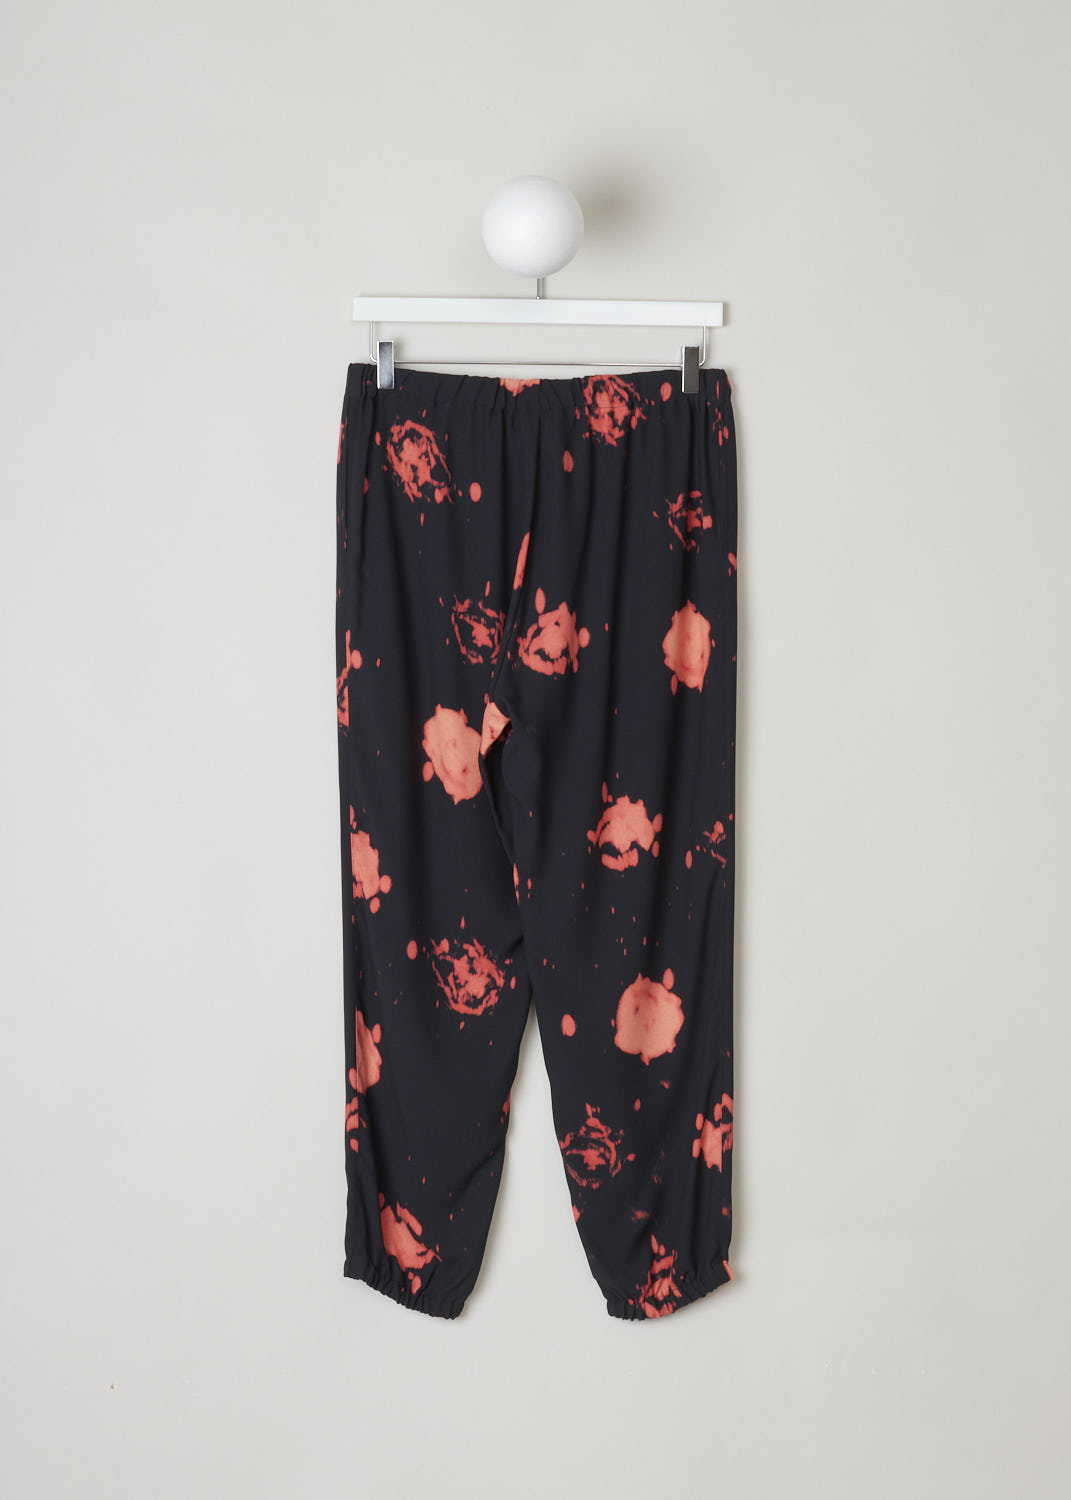 MARNI, BLACK JOGGERS WITH ABSTRACT PRINT, PAMA0291A1_UTV858_FRN99, Black, Print, Back, Beautiful black joggers with an abstract print throughout. These comfortable pants have an elasticated waistband and a drawstring as well as elasticated cuffed hems. Two slanted pockets can be found on either side. 